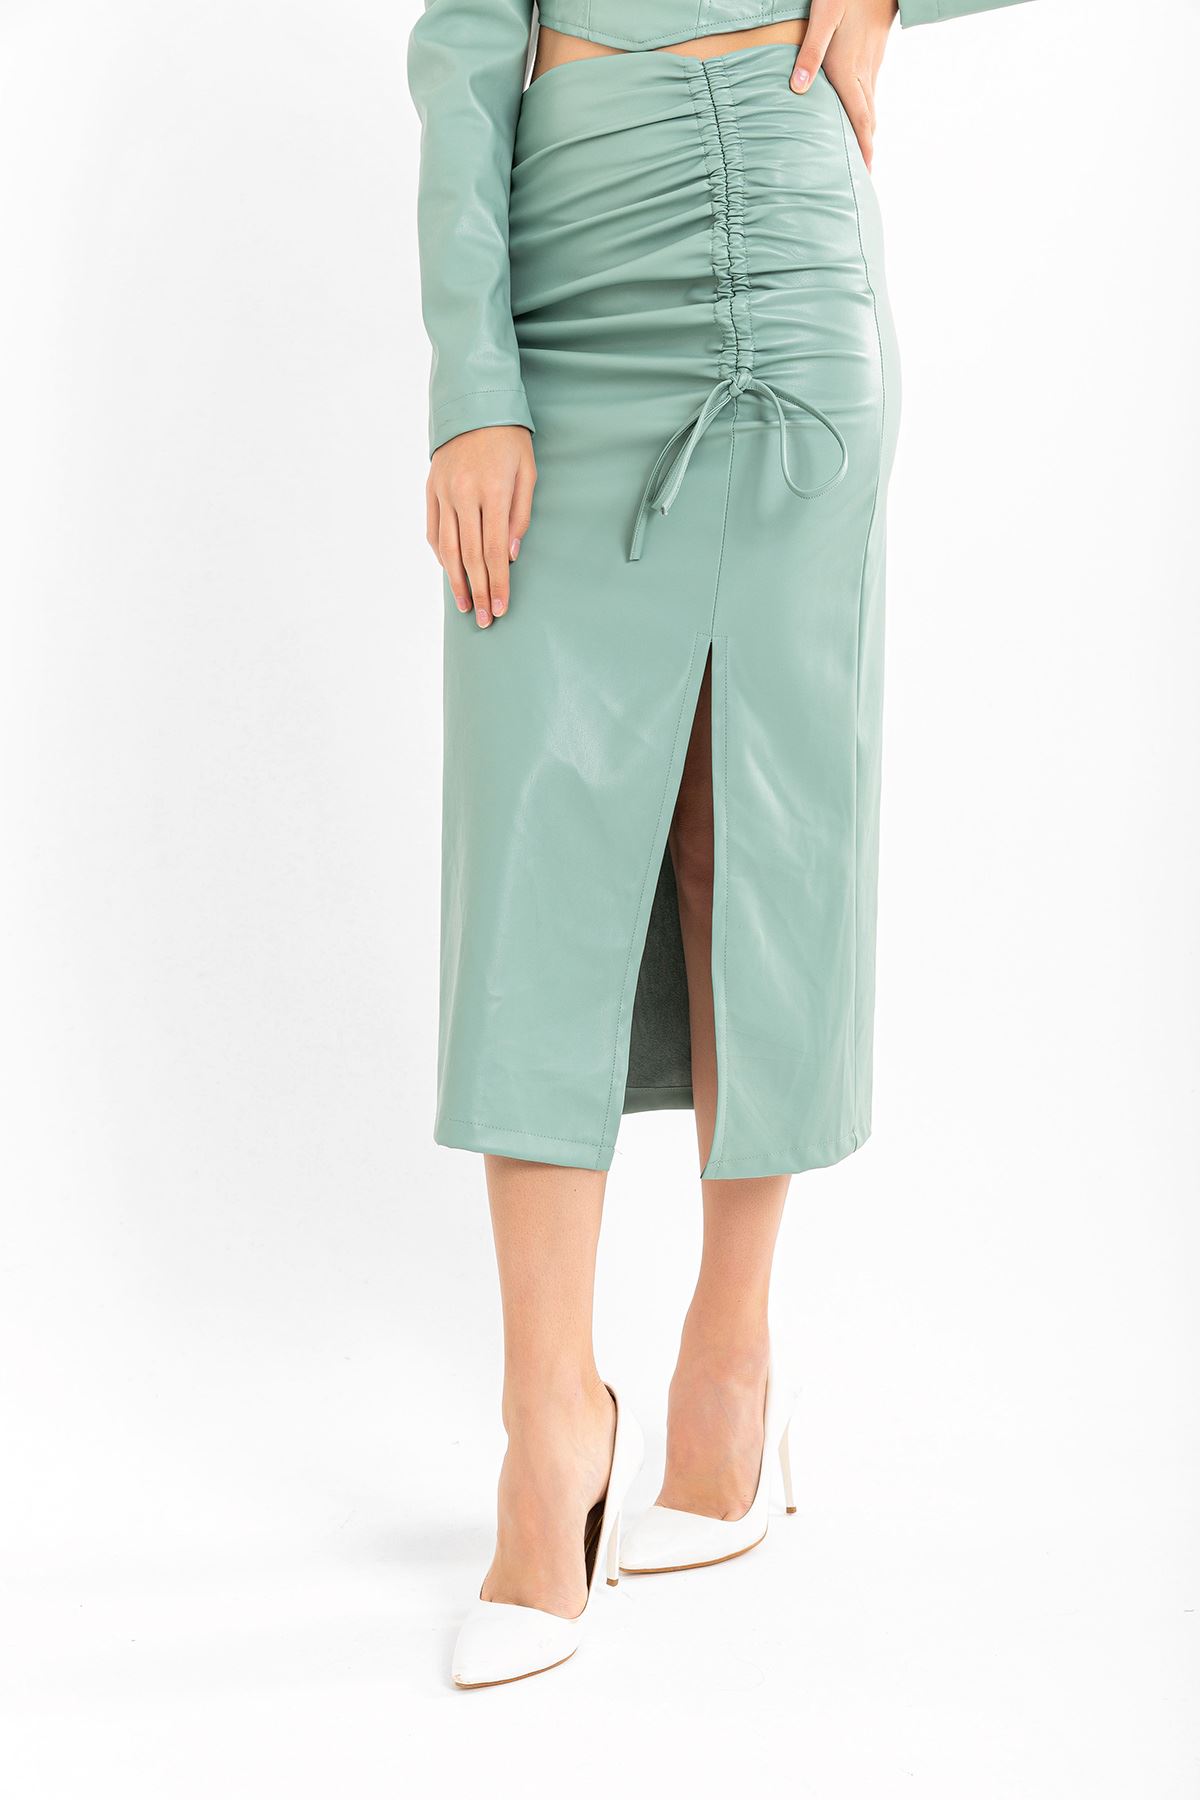 Leather Fabric Above Knee Shirred Slit Women'S Skirt - Mint